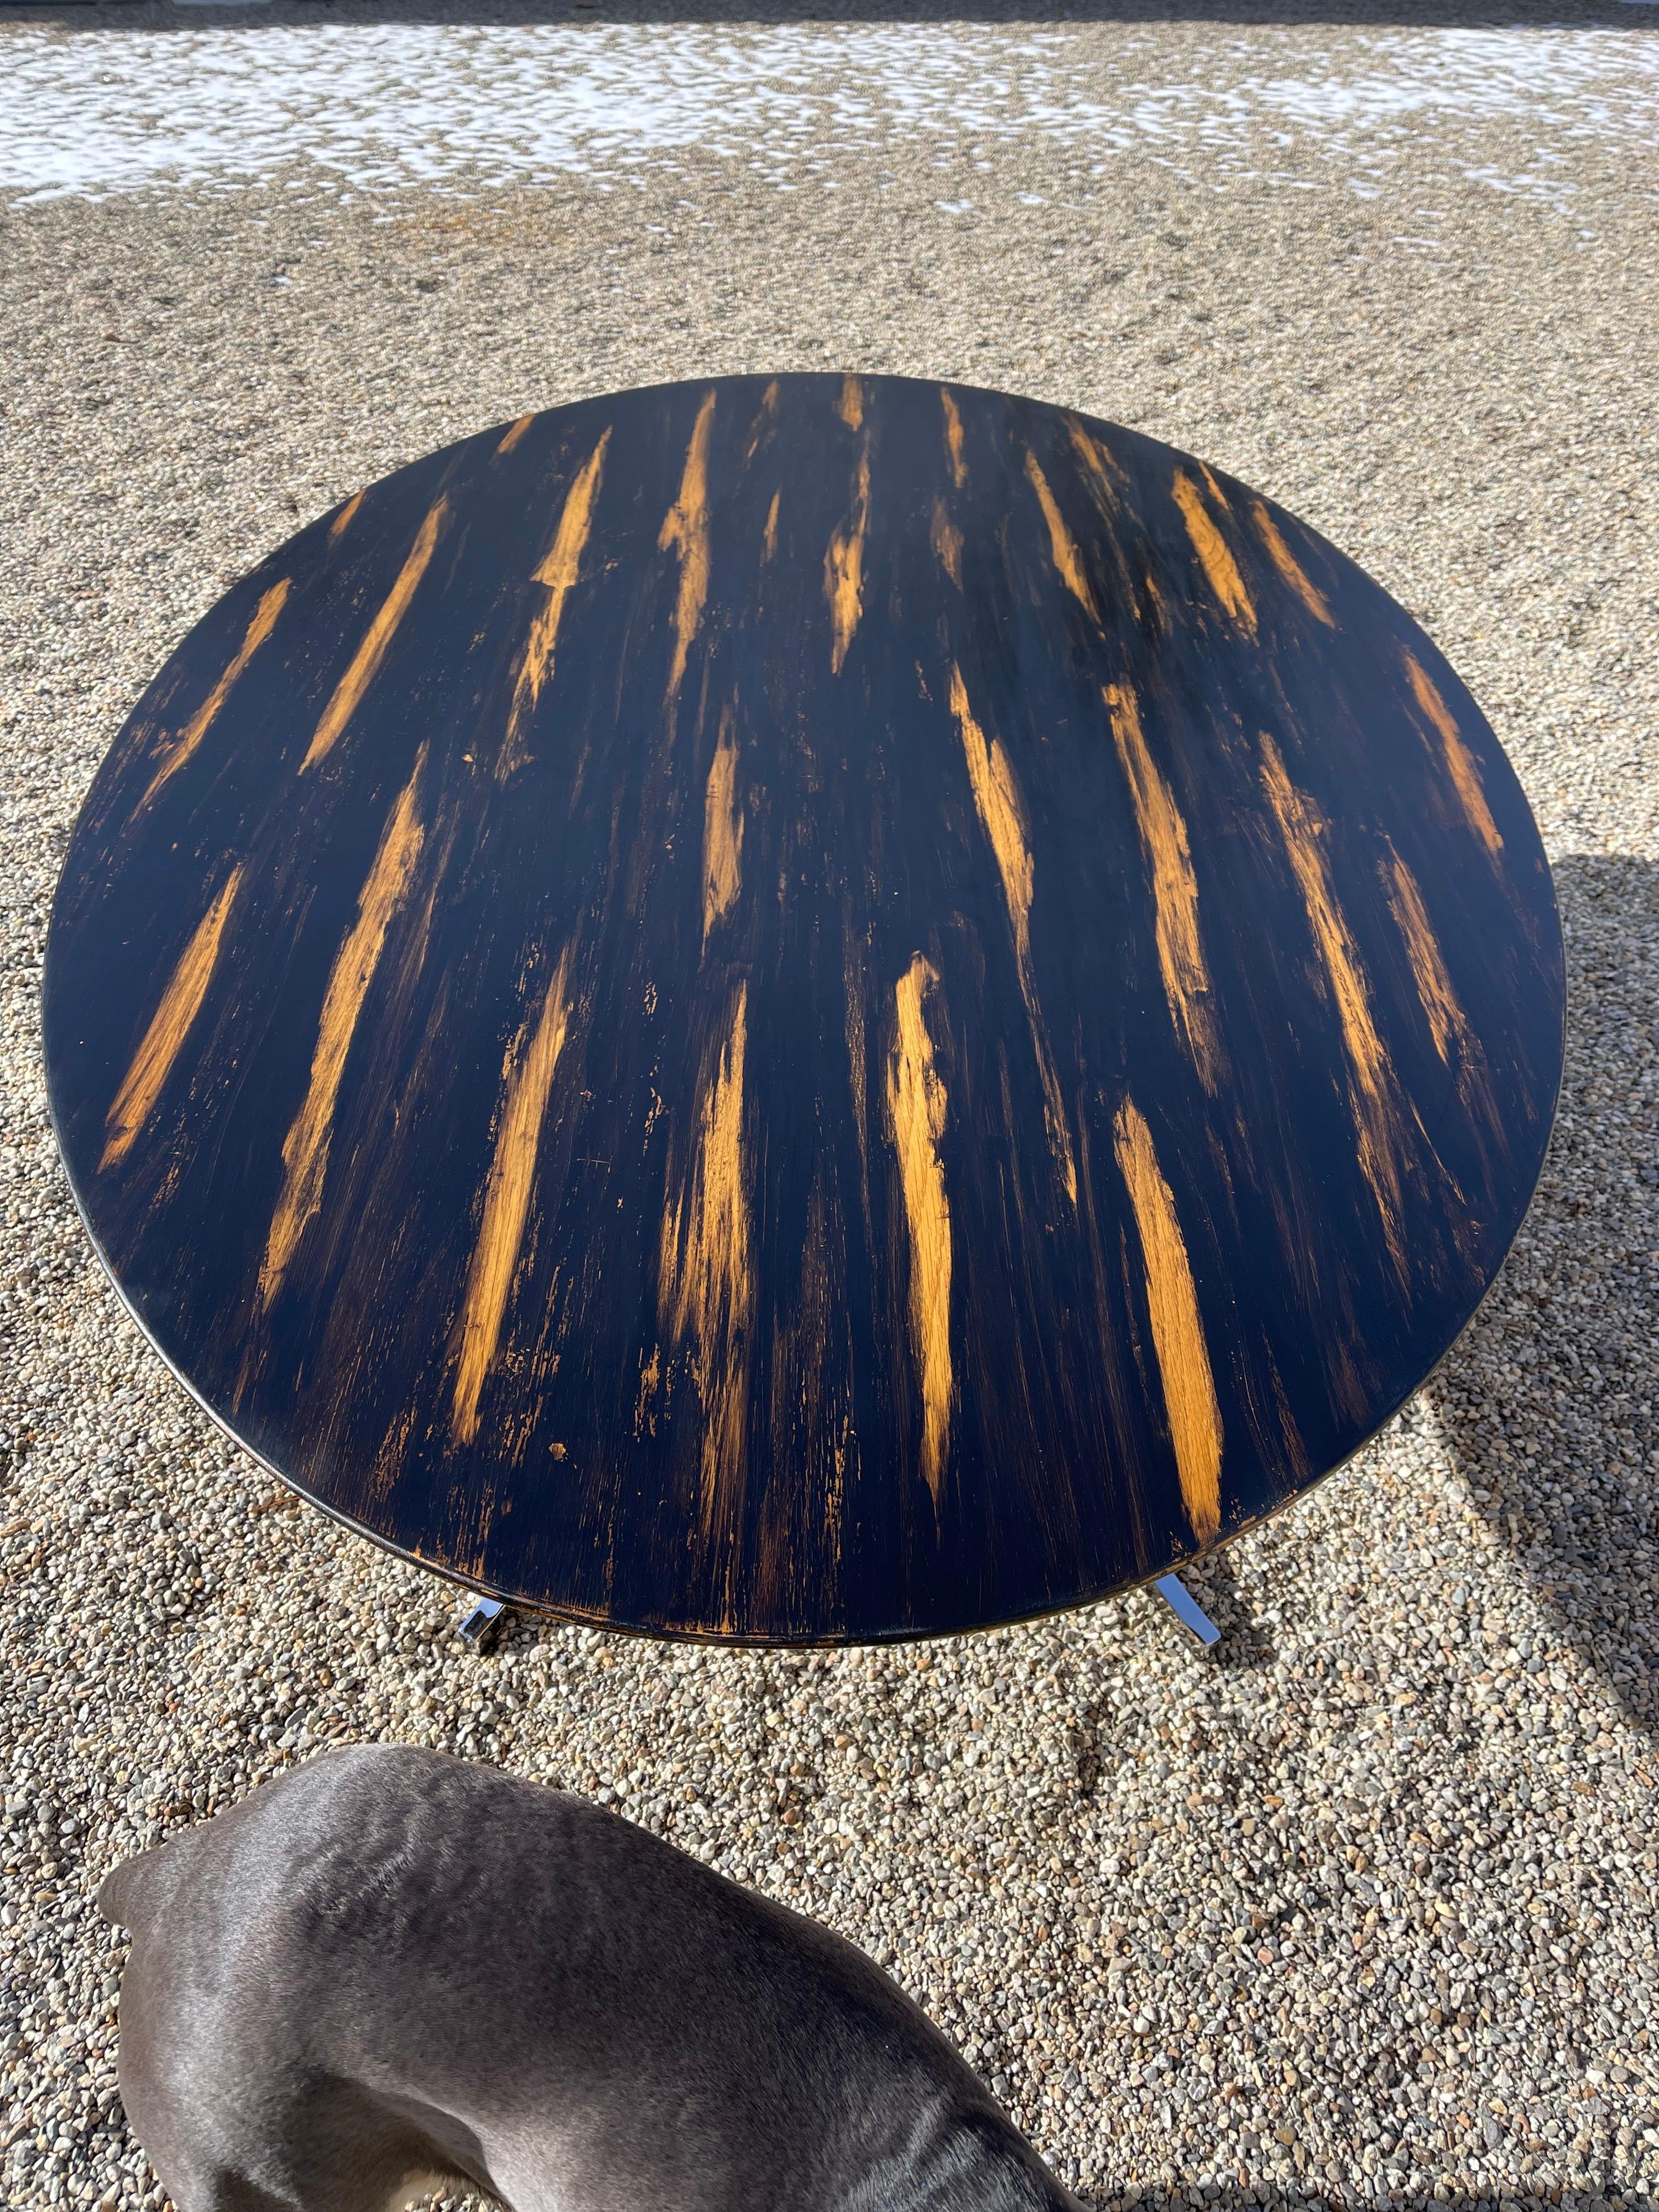 This Table was originally designed by Florence Knoll in 1961. 
The top is veneered in book matched oak and hand painted by Alexander Westerhoff inspired by an African Shield. The finish is a special method he used to achieve a dry charcoal look and